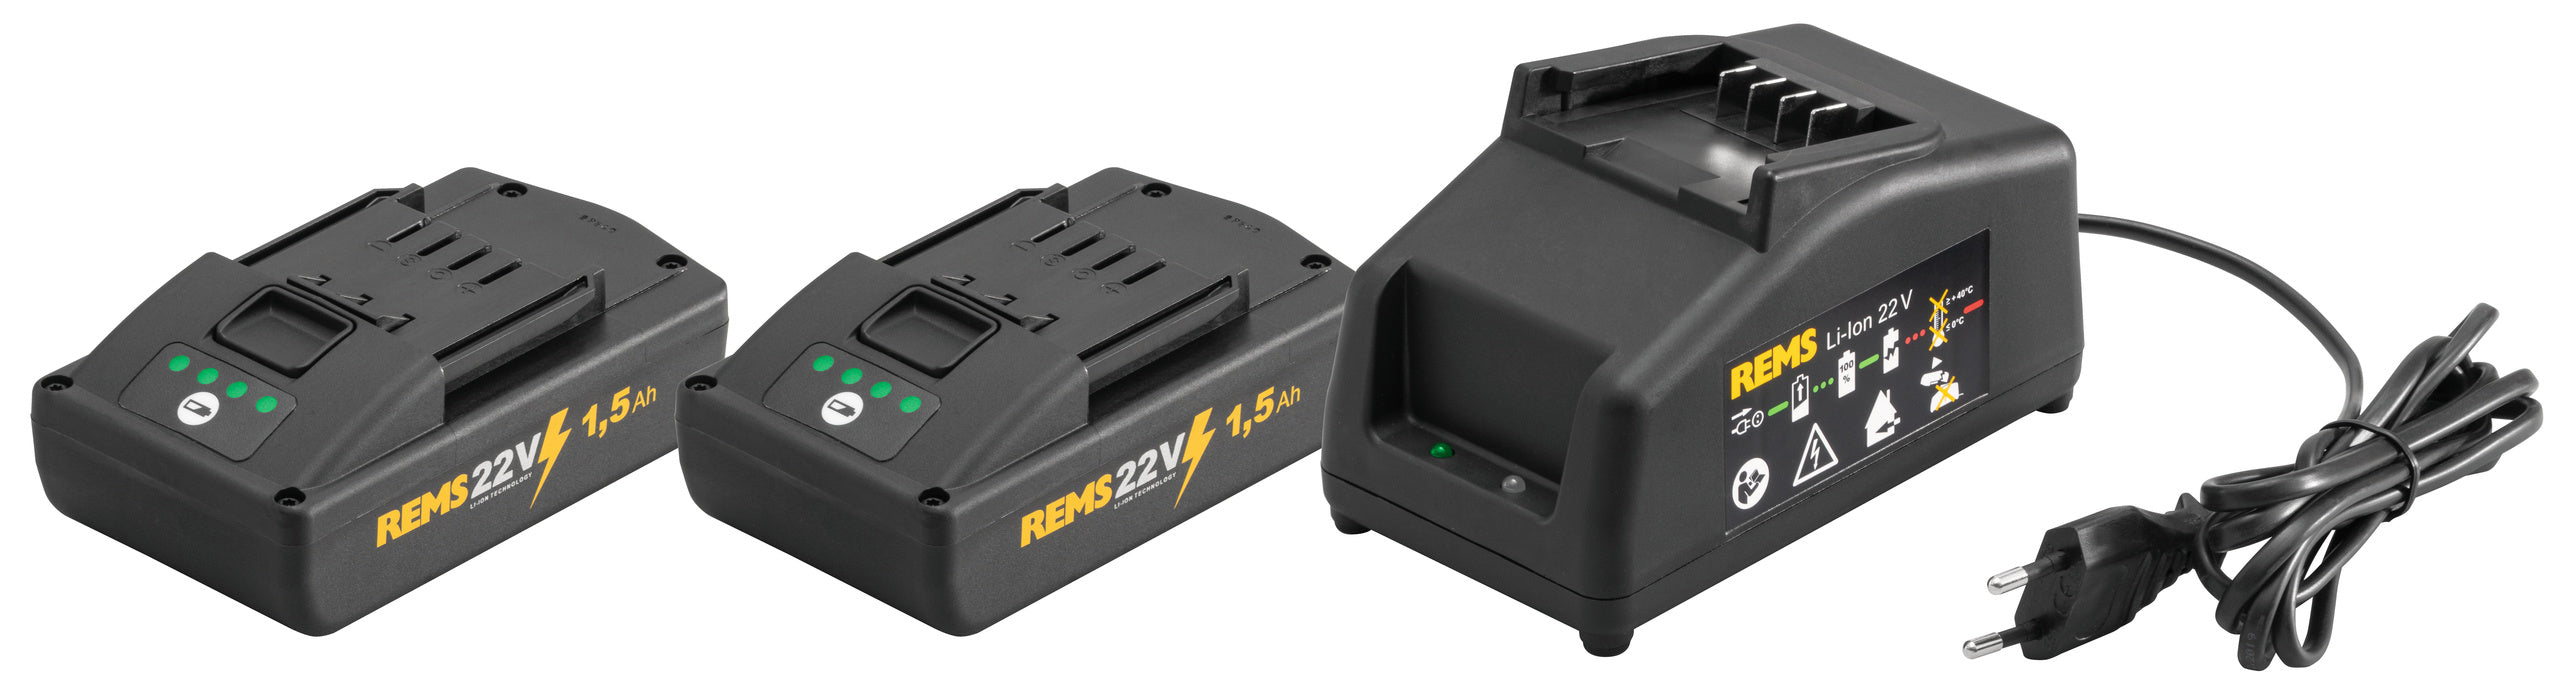 REMS Power-Pack 22 V, 2 x 1.5 Ah Batteries & Charger